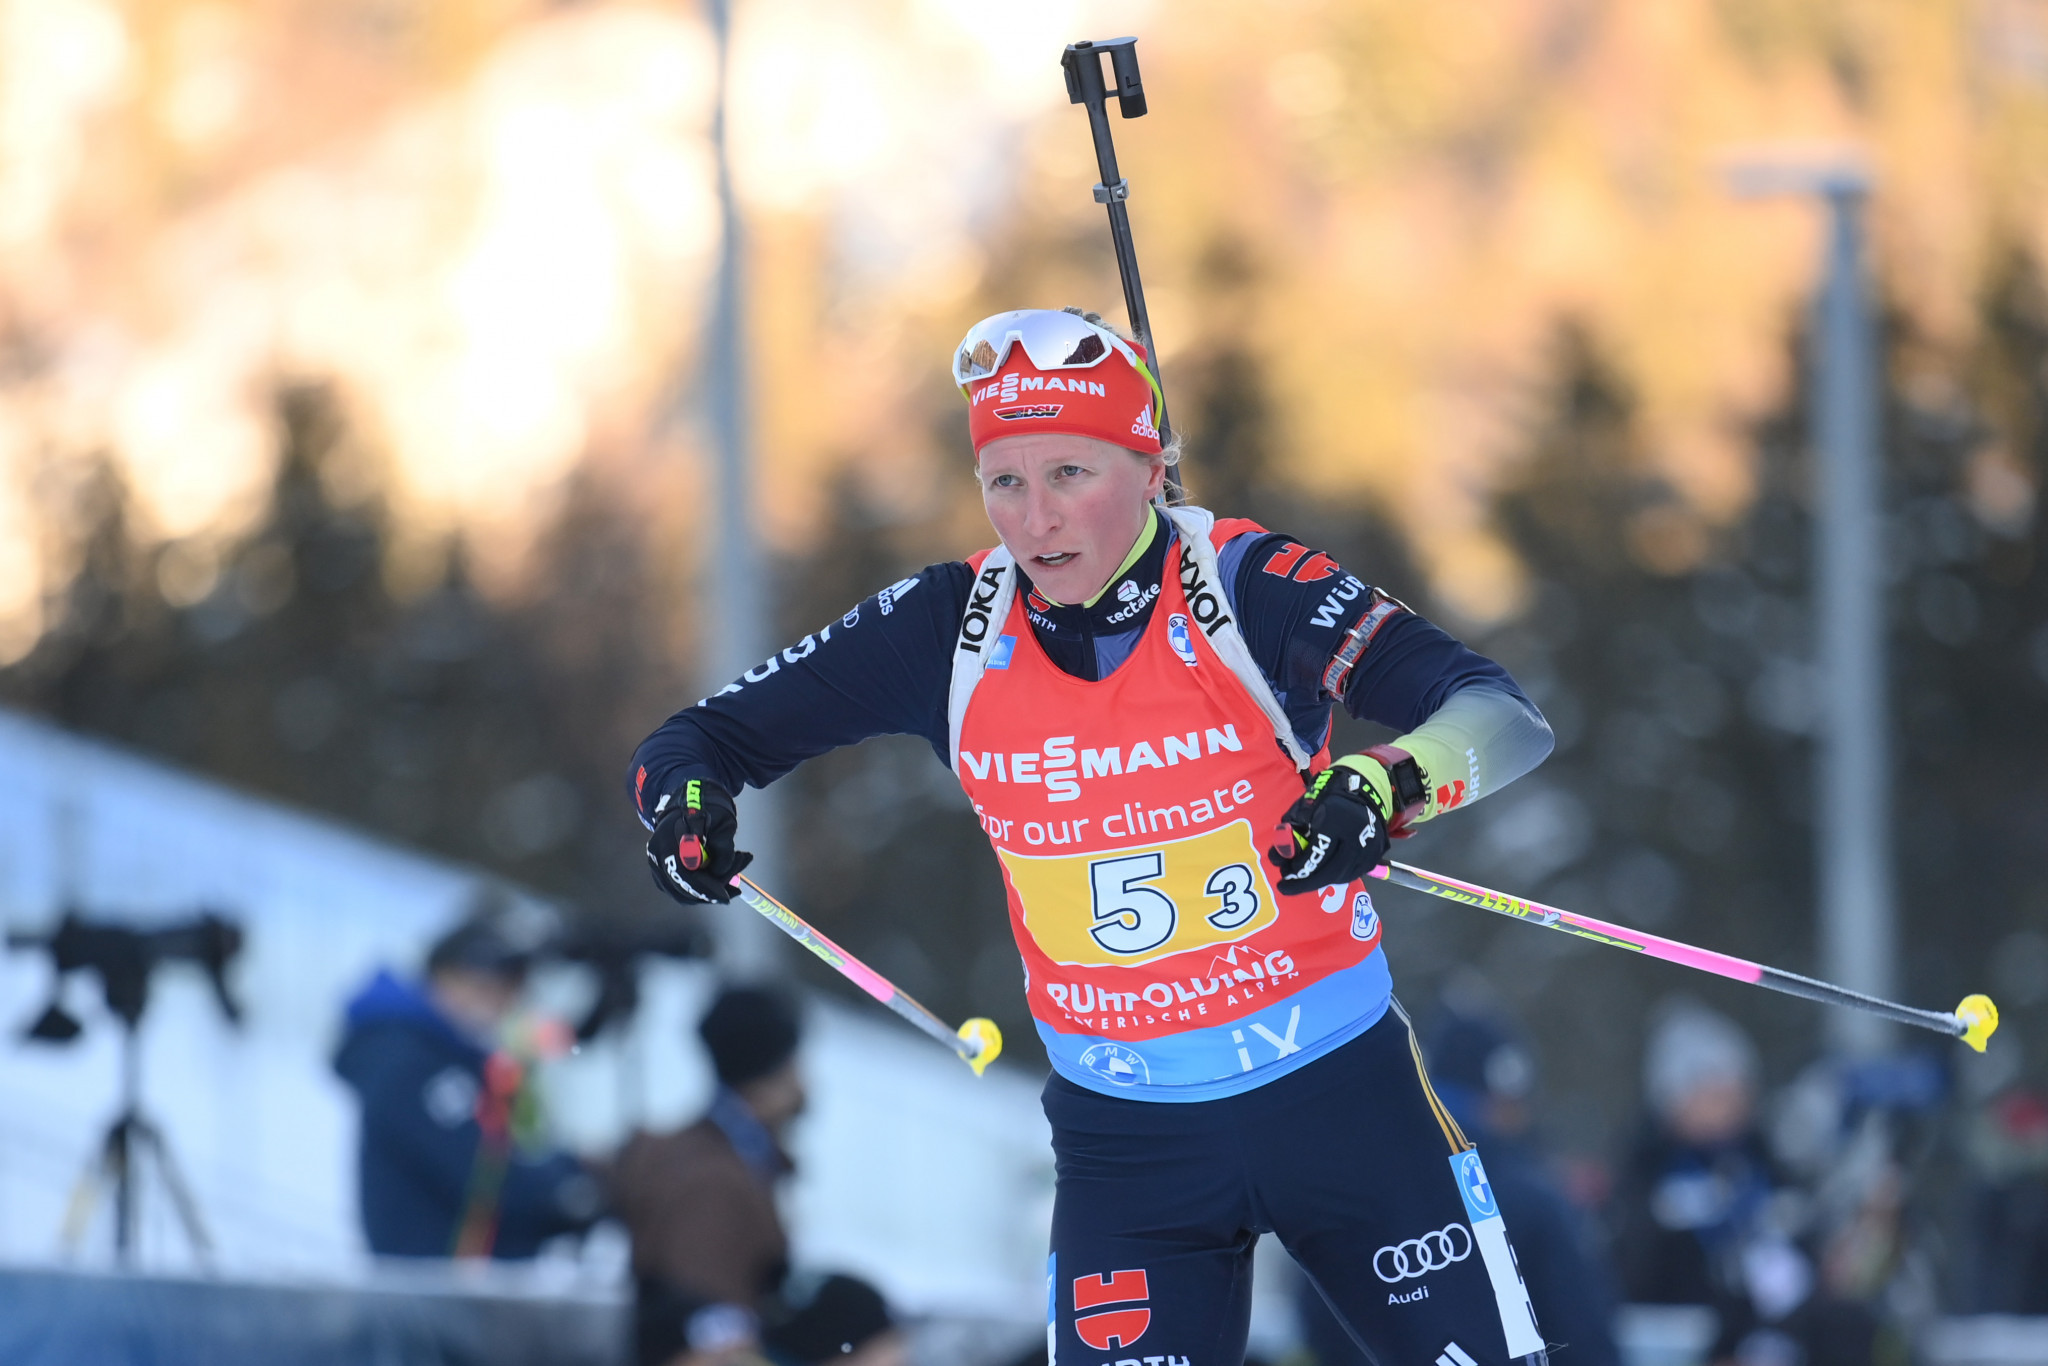 Two-time relay world champion Hildebrand retires from biathlon after pregnancy